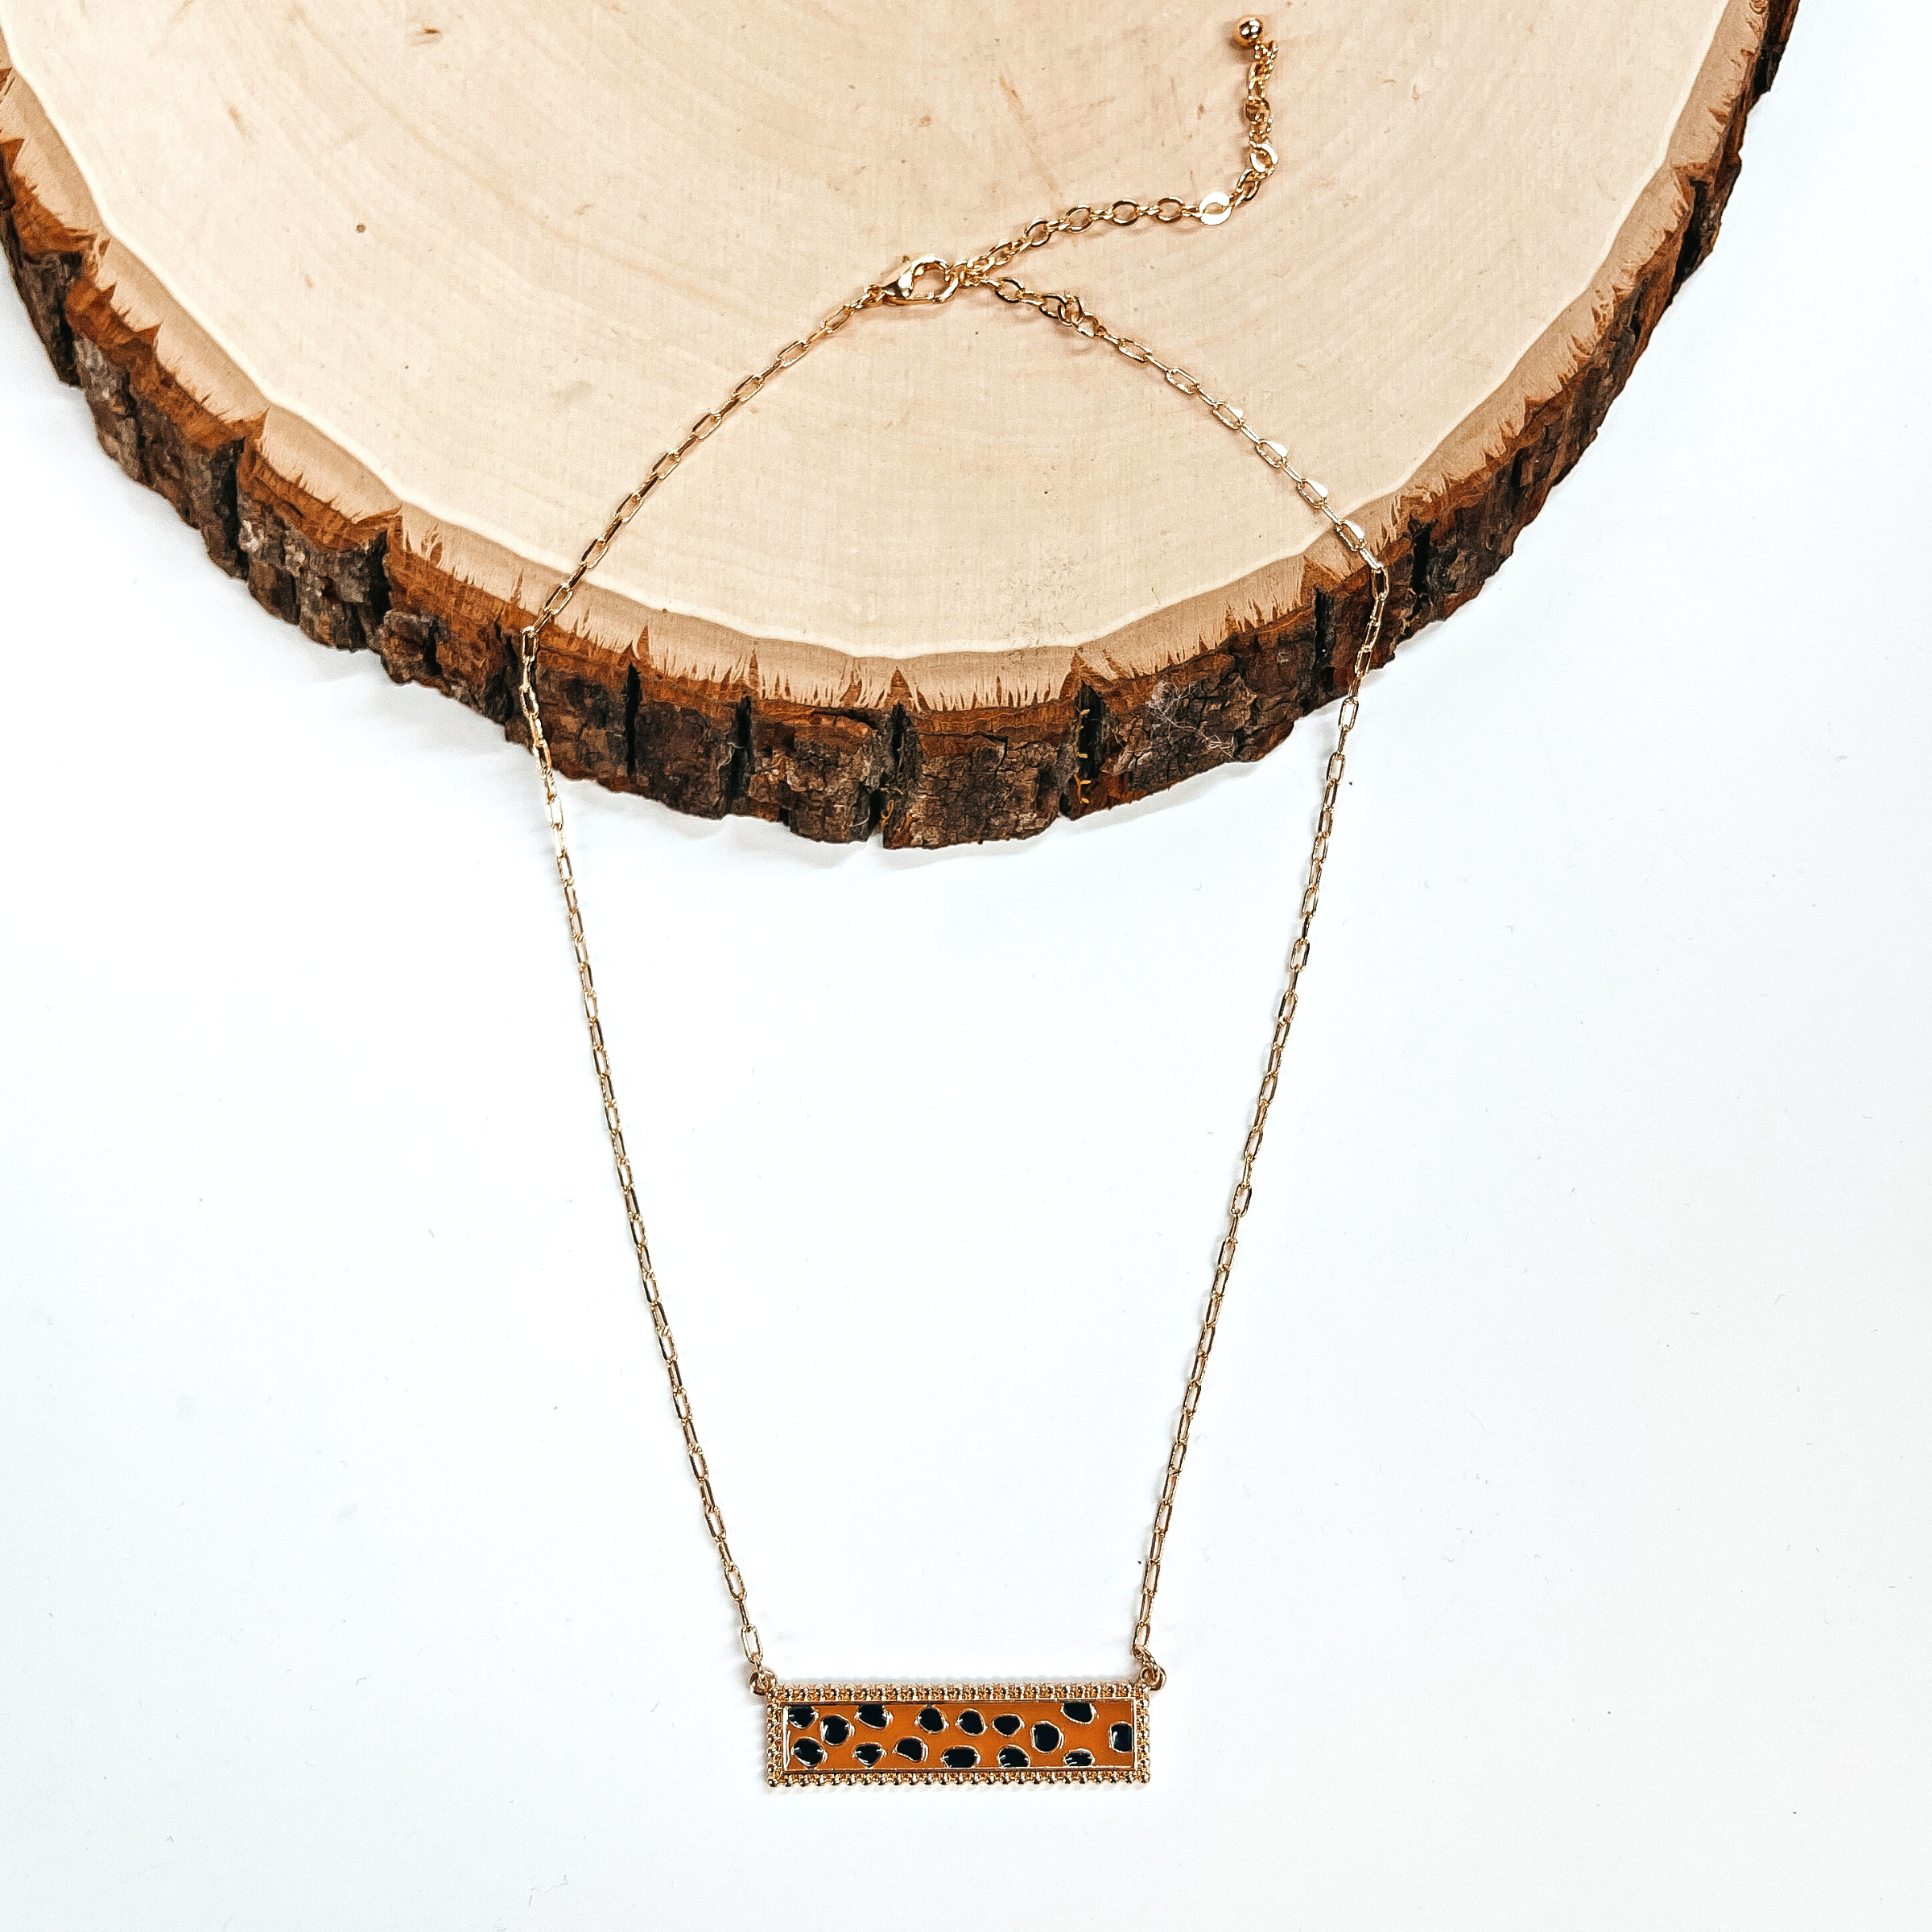 This is a thin gold tone chain necklace with a rectangle bar pendant in black and brown  dotted print. The black and brown dotted print rectangle bar is in a gold tone setting. This necklace is taken laying on a white background and a slab of wood.